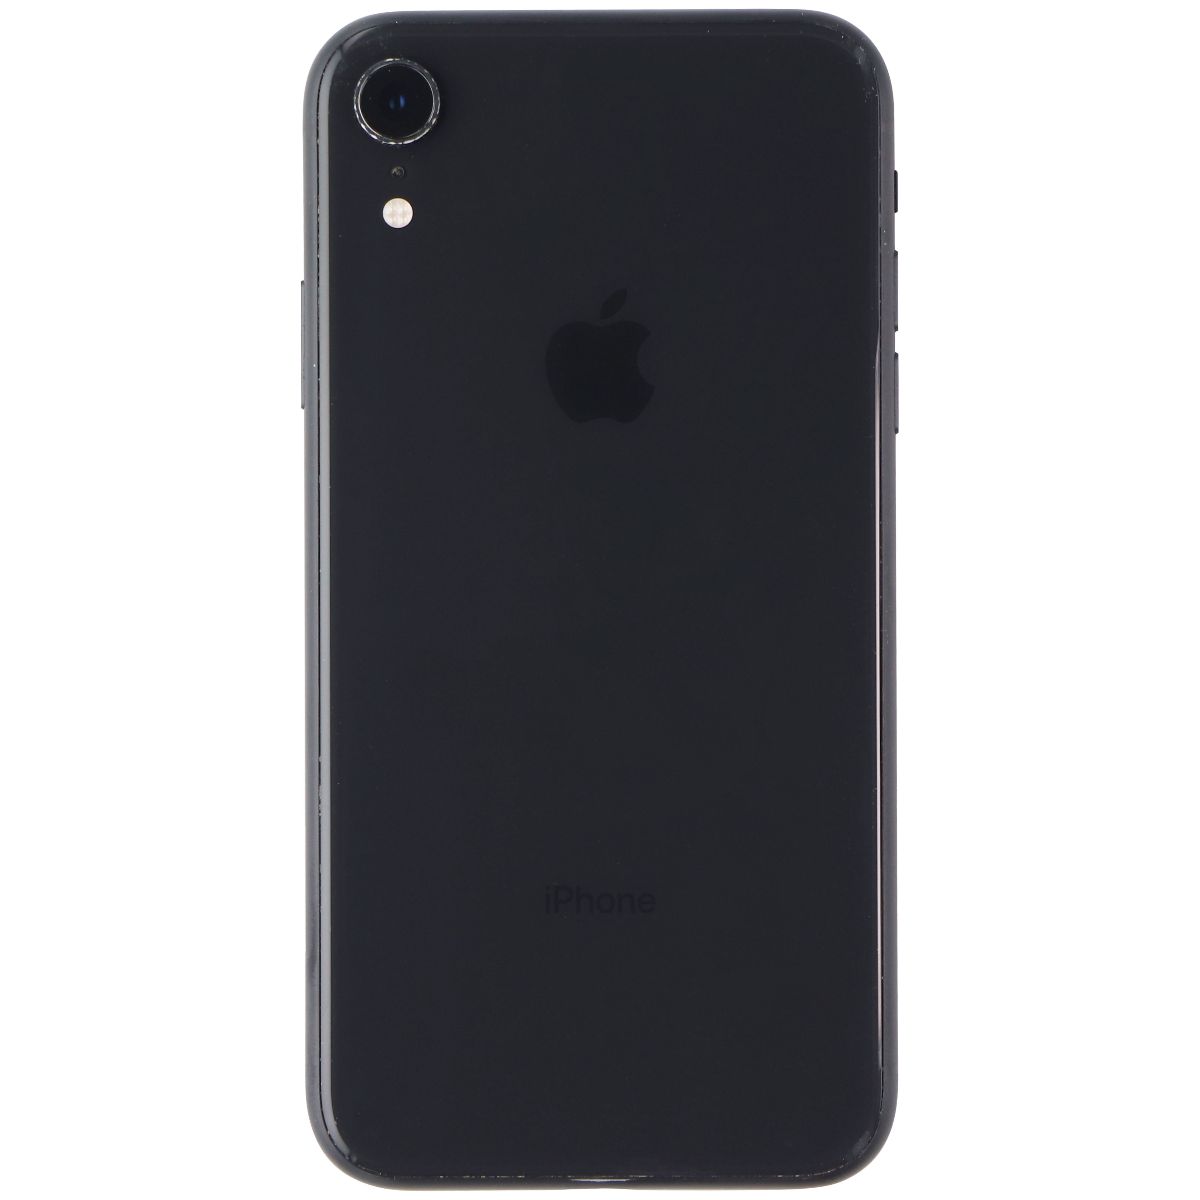 Apple iPhone 12 (6.1-inch) (A2172) Unlocked - 128GB/Black - BAD FACE ID* Cell Phones & Smartphones Apple    - Simple Cell Bulk Wholesale Pricing - USA Seller